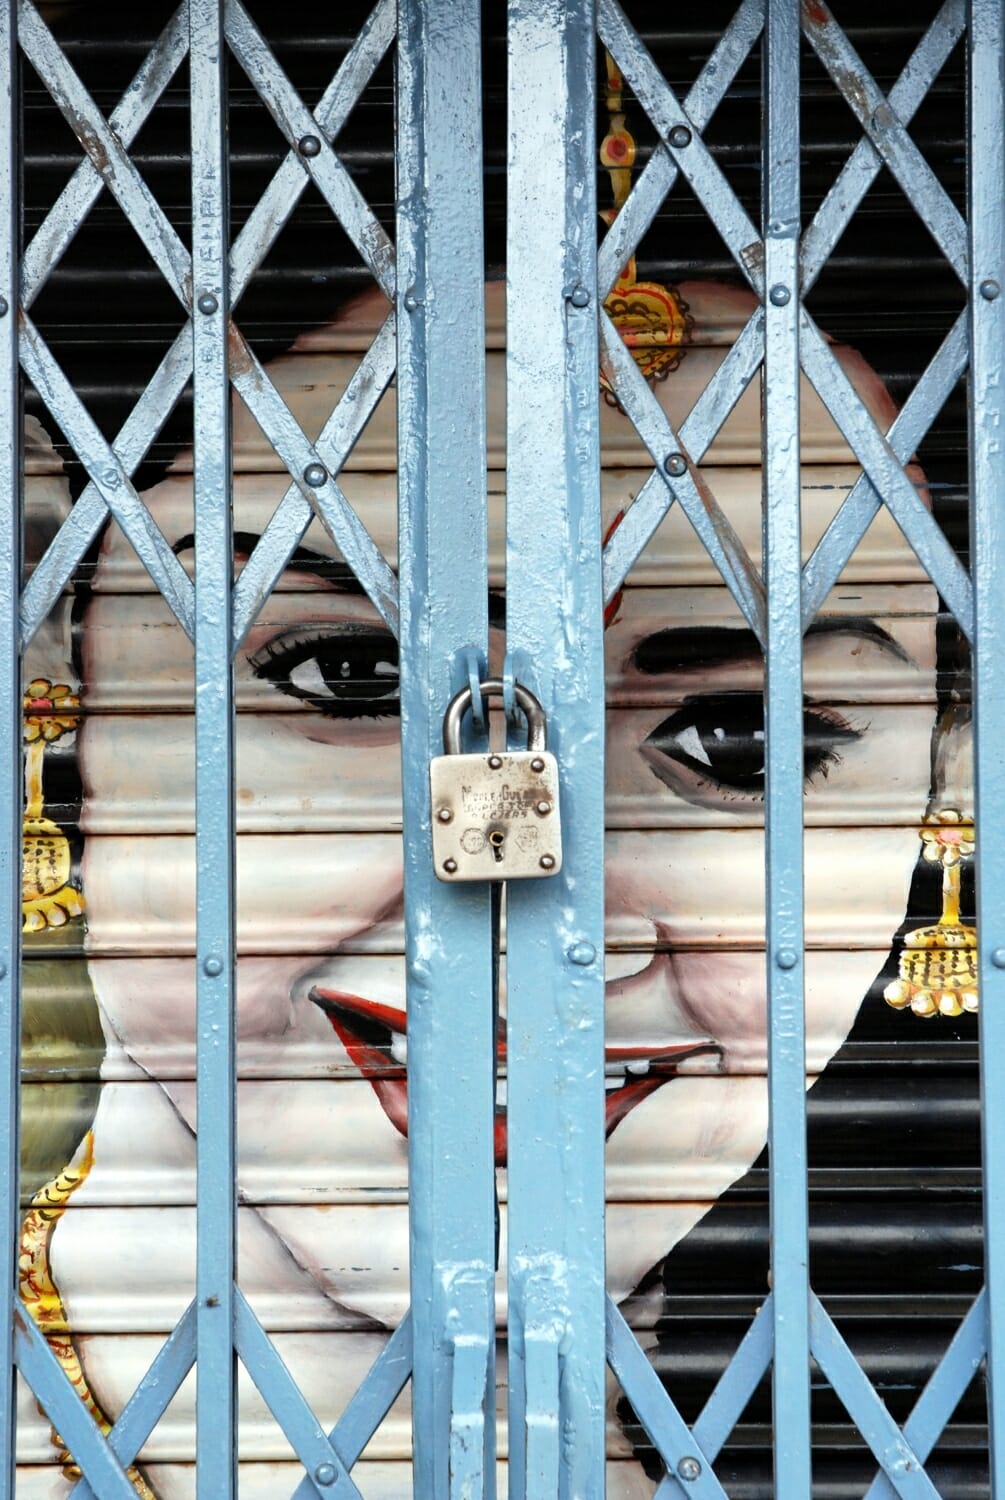 <span style="font-weight:normal;">Under Lock and Key, Tamil Nadu, 2010</span>